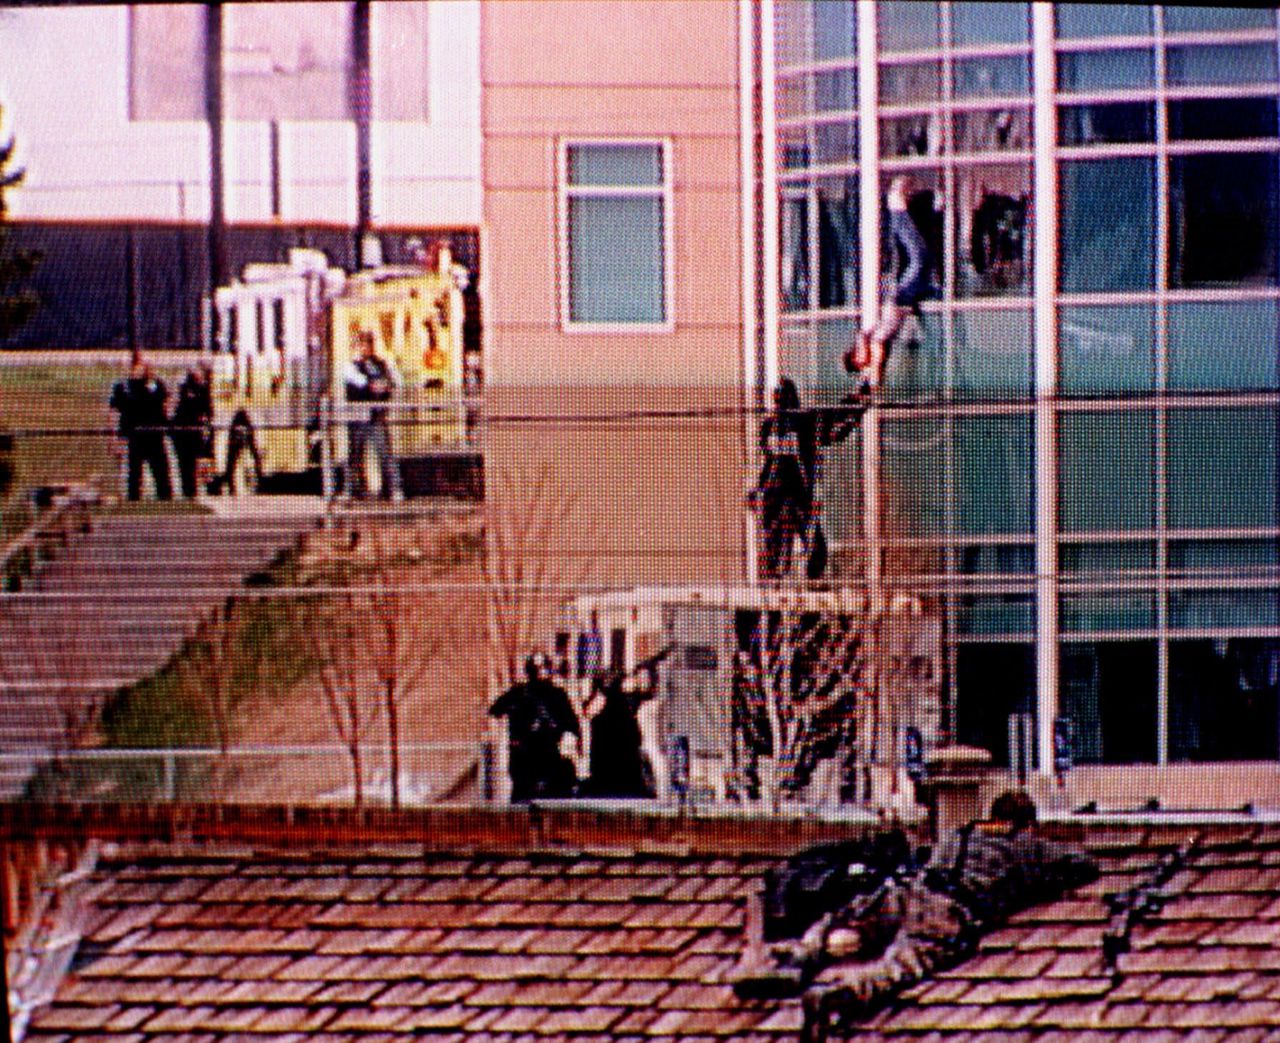 The Horrific 1999 Columbine High School Shooting: A Day That Changed Everything